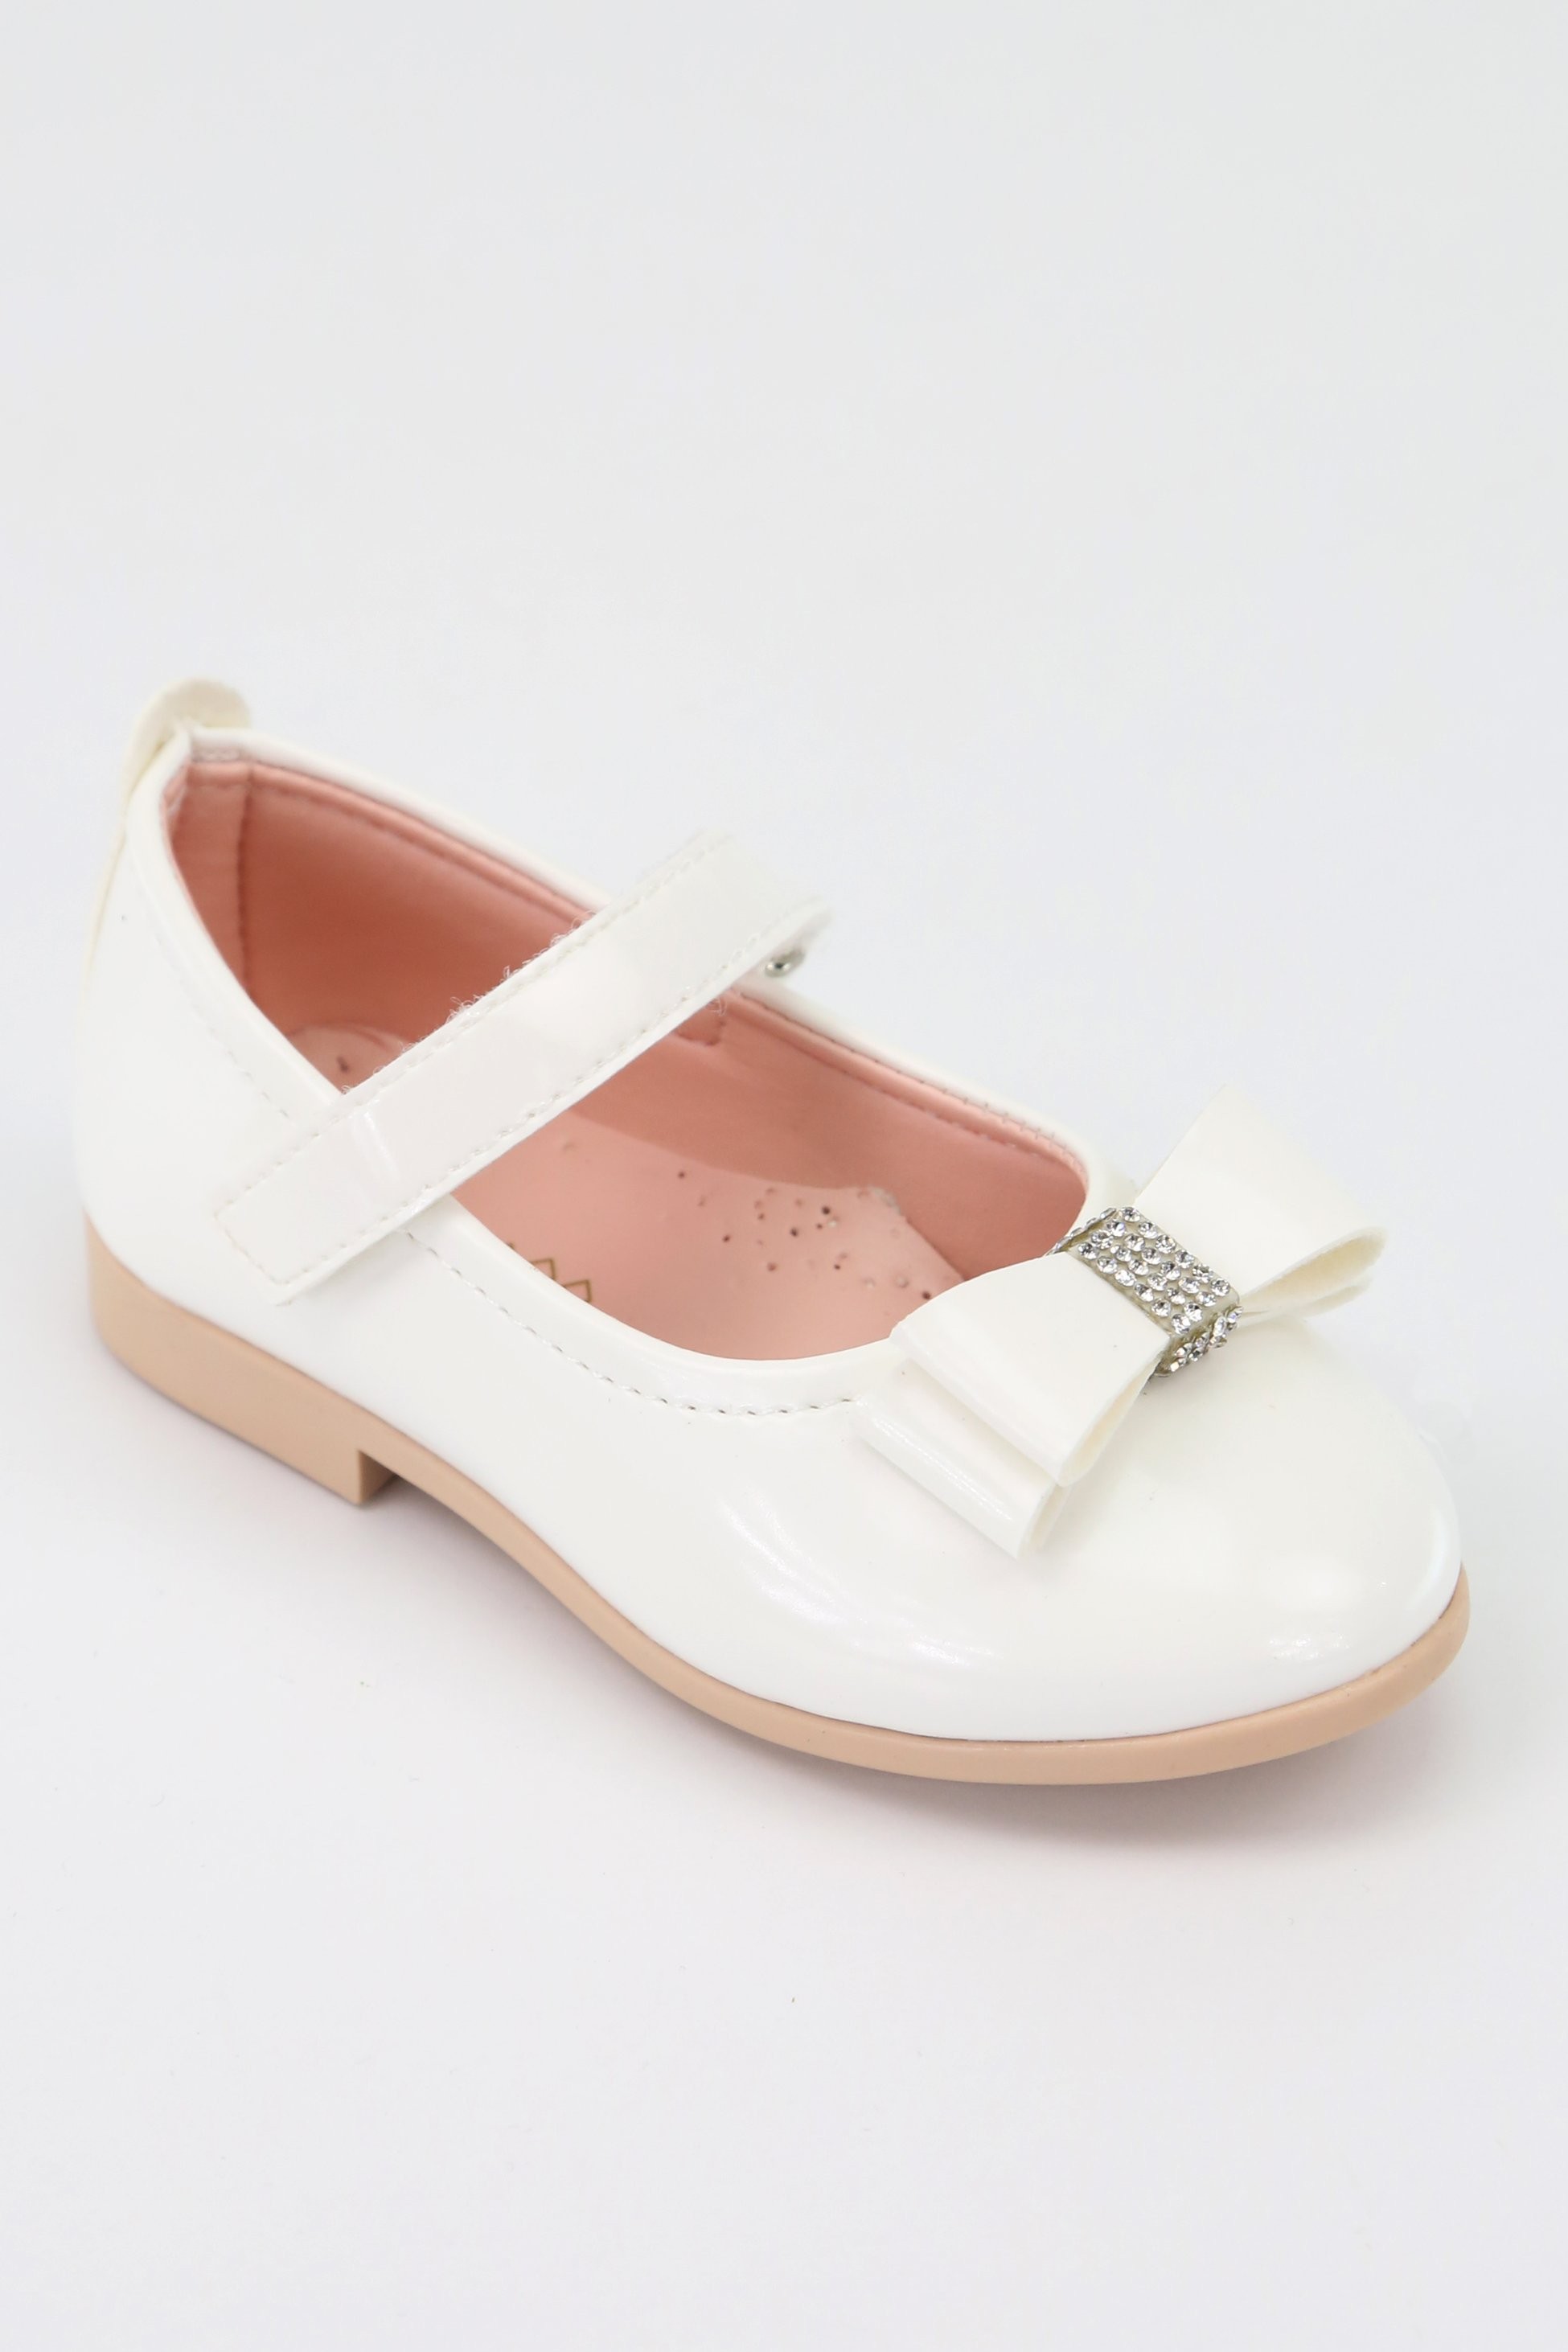 Girls Mary Jane Flat Patent Dress Shoes in Ivory - Off White - LAYLA